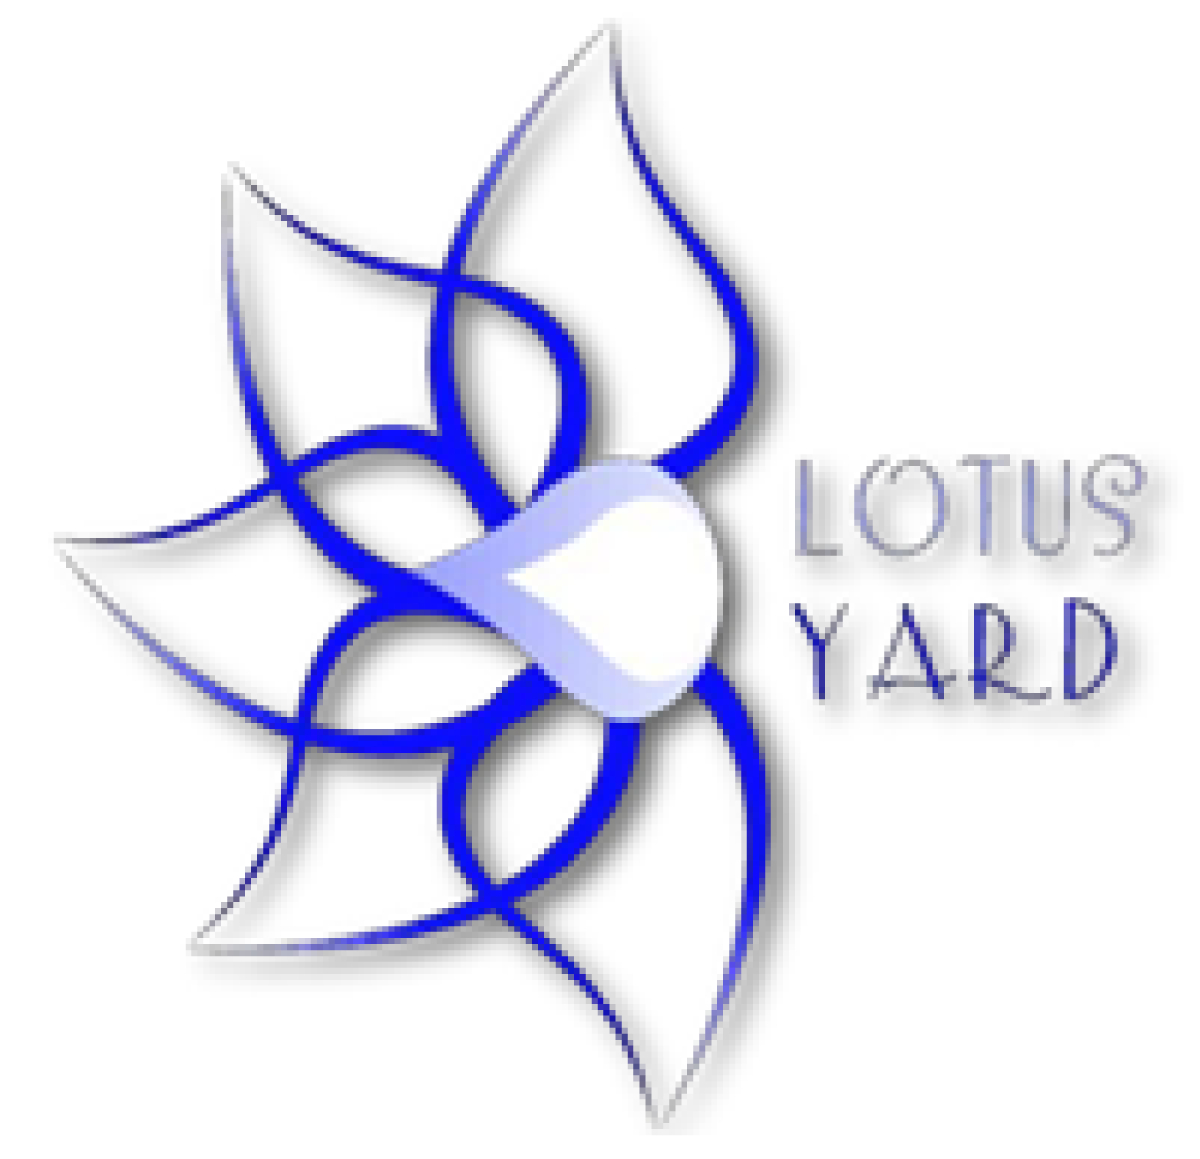 Lotus Yard Building Maintenance & Cleaning Services LLC